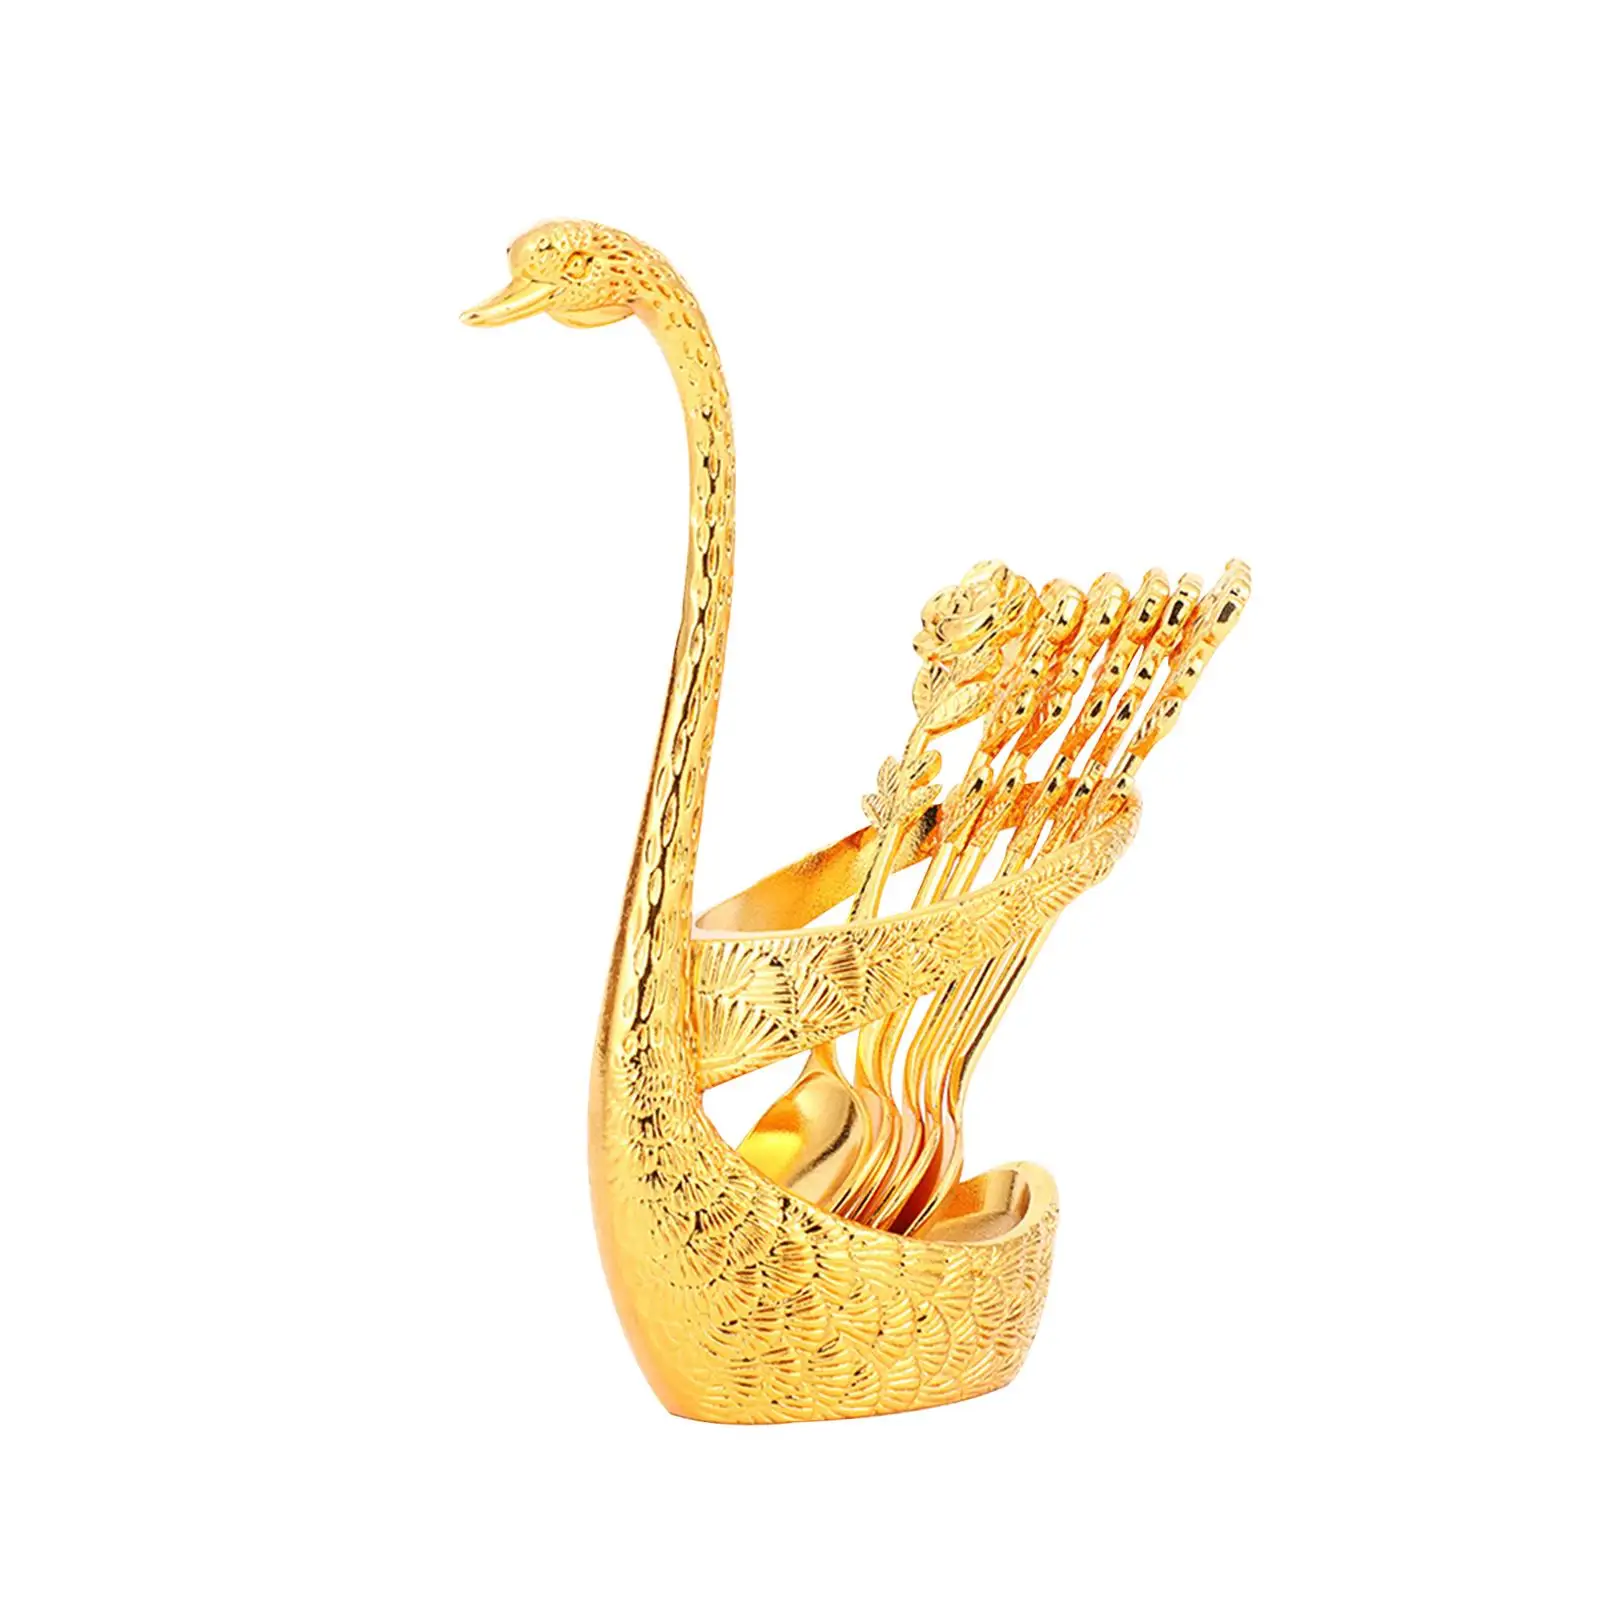 Decorative Swan Base Holder with 6 Spoons for Coffee Restaurant Kitchen